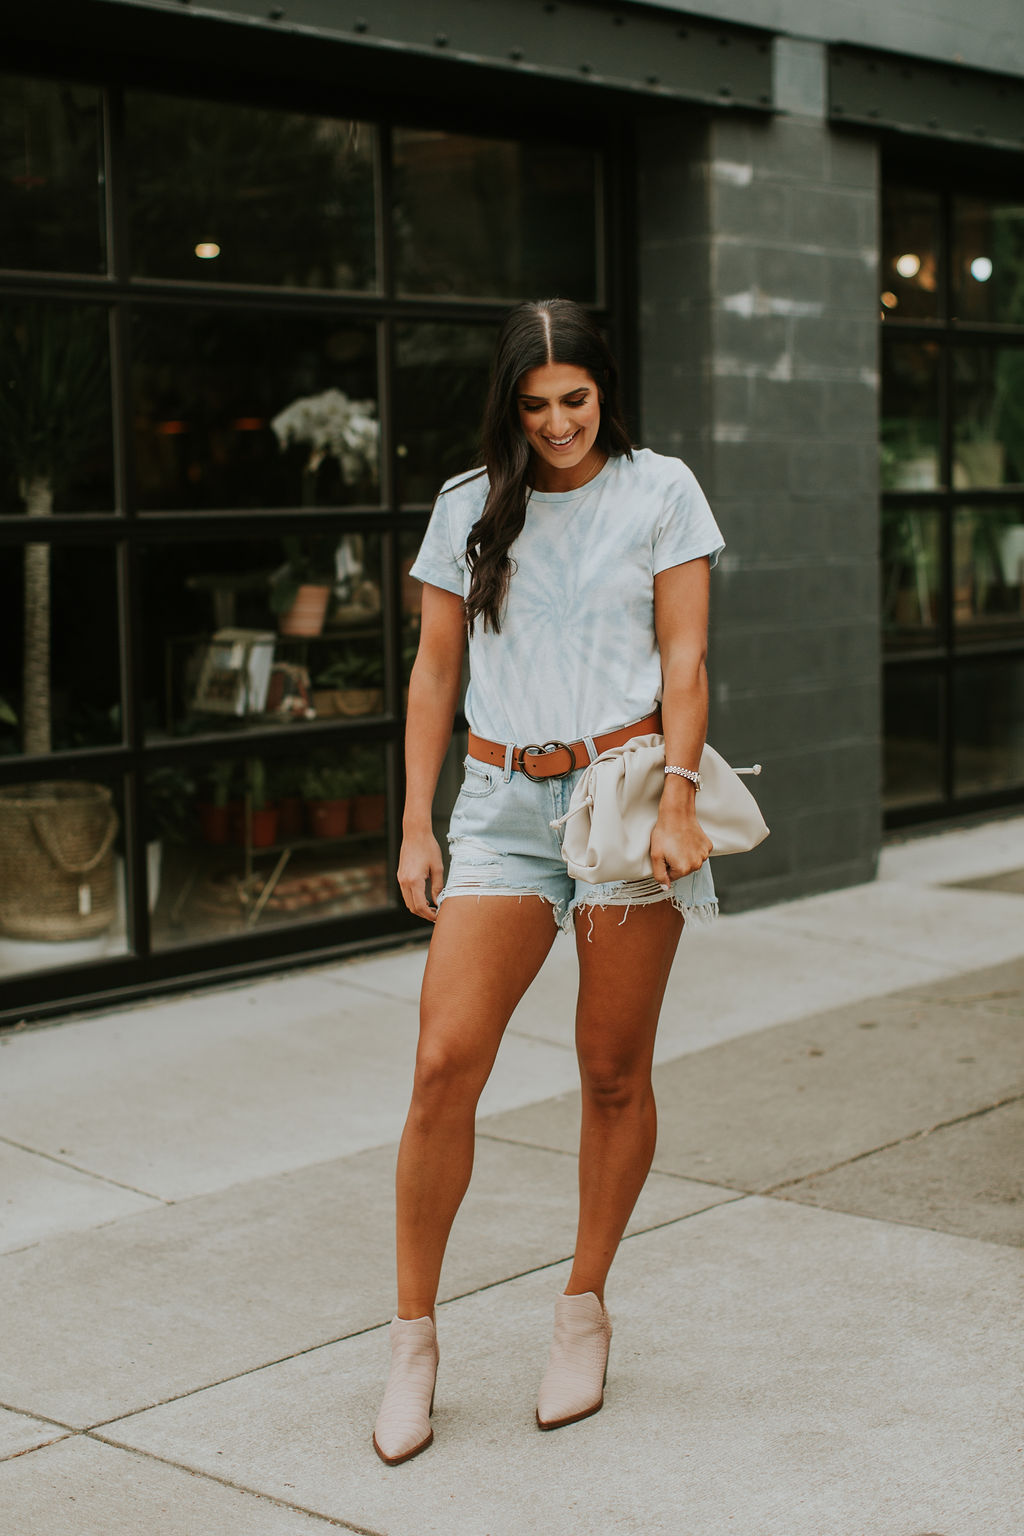 tie dye shirt, 8 things to do before 8 am, morning routine, morning tips, lifestyle tips, productivity tips // grace white a southern drawl